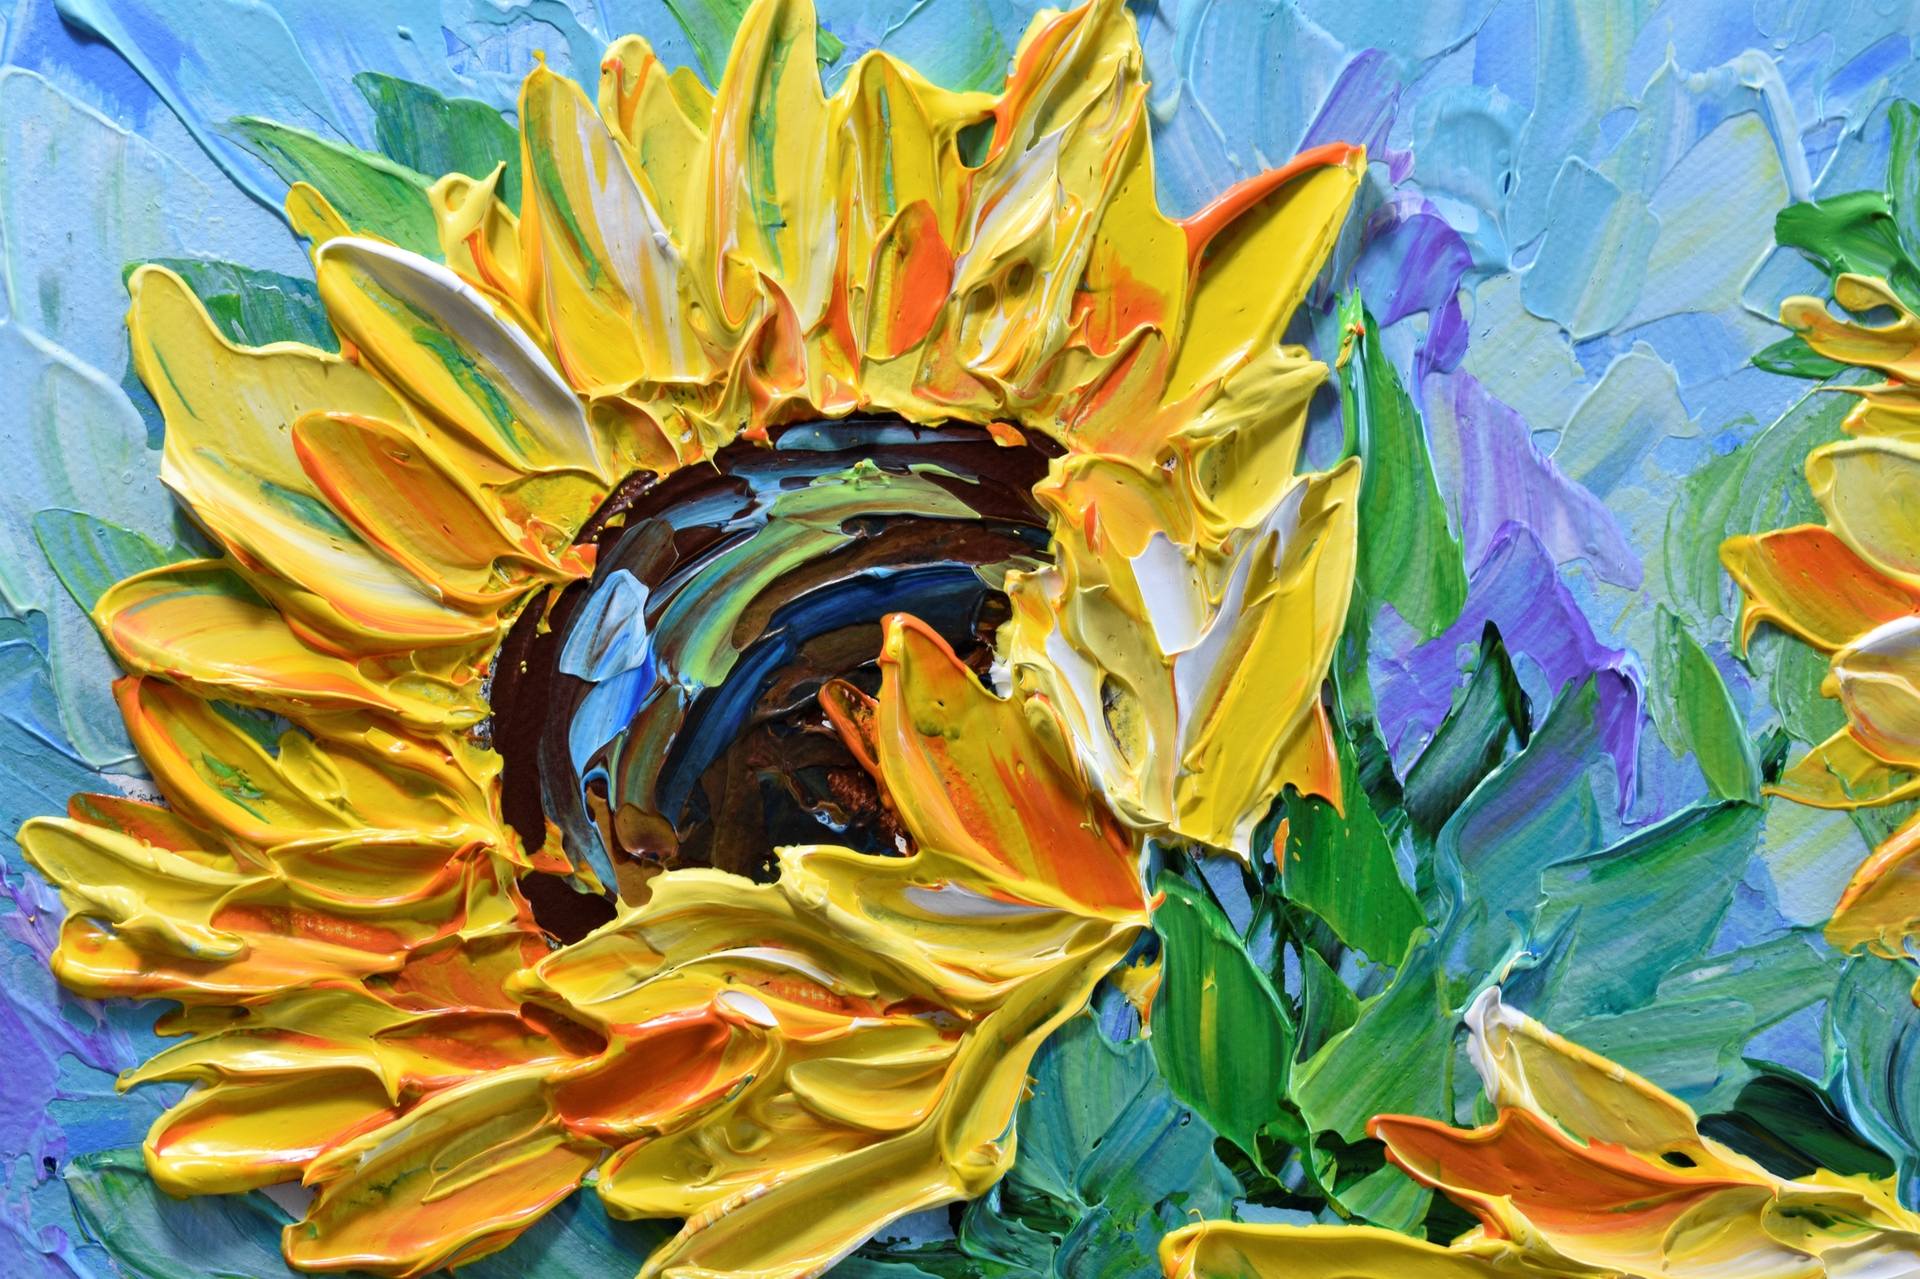 Palette Knife Flower Painting, Flower Acrylic Painting for Sale  SOAAP0325422QF